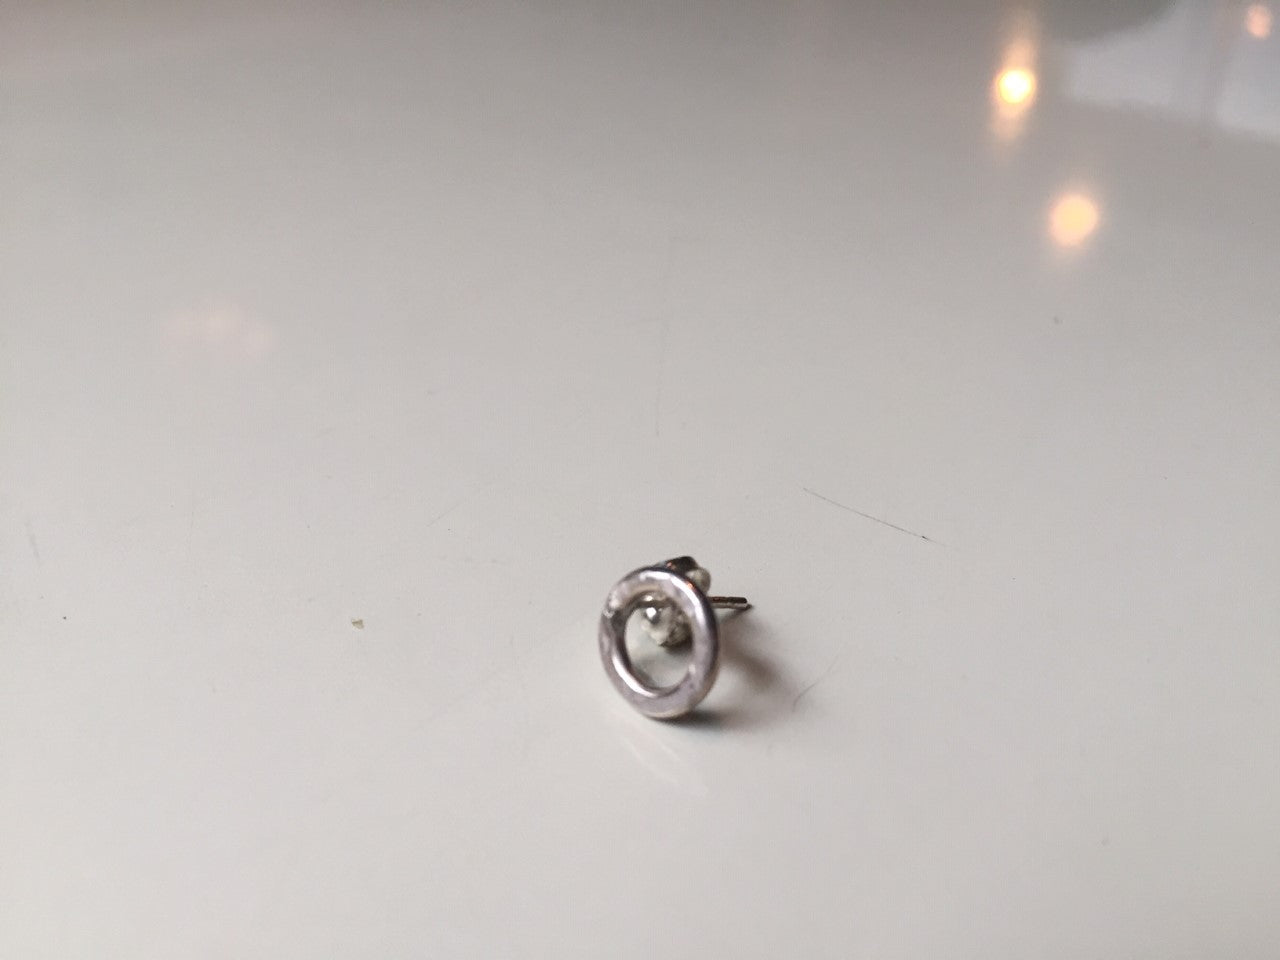 Hammered Silver925 Single Circle Ring Stud Earring For Men & Women with Matte Finish シルバー ユニセックス 槌目 艶消し サークルピアス